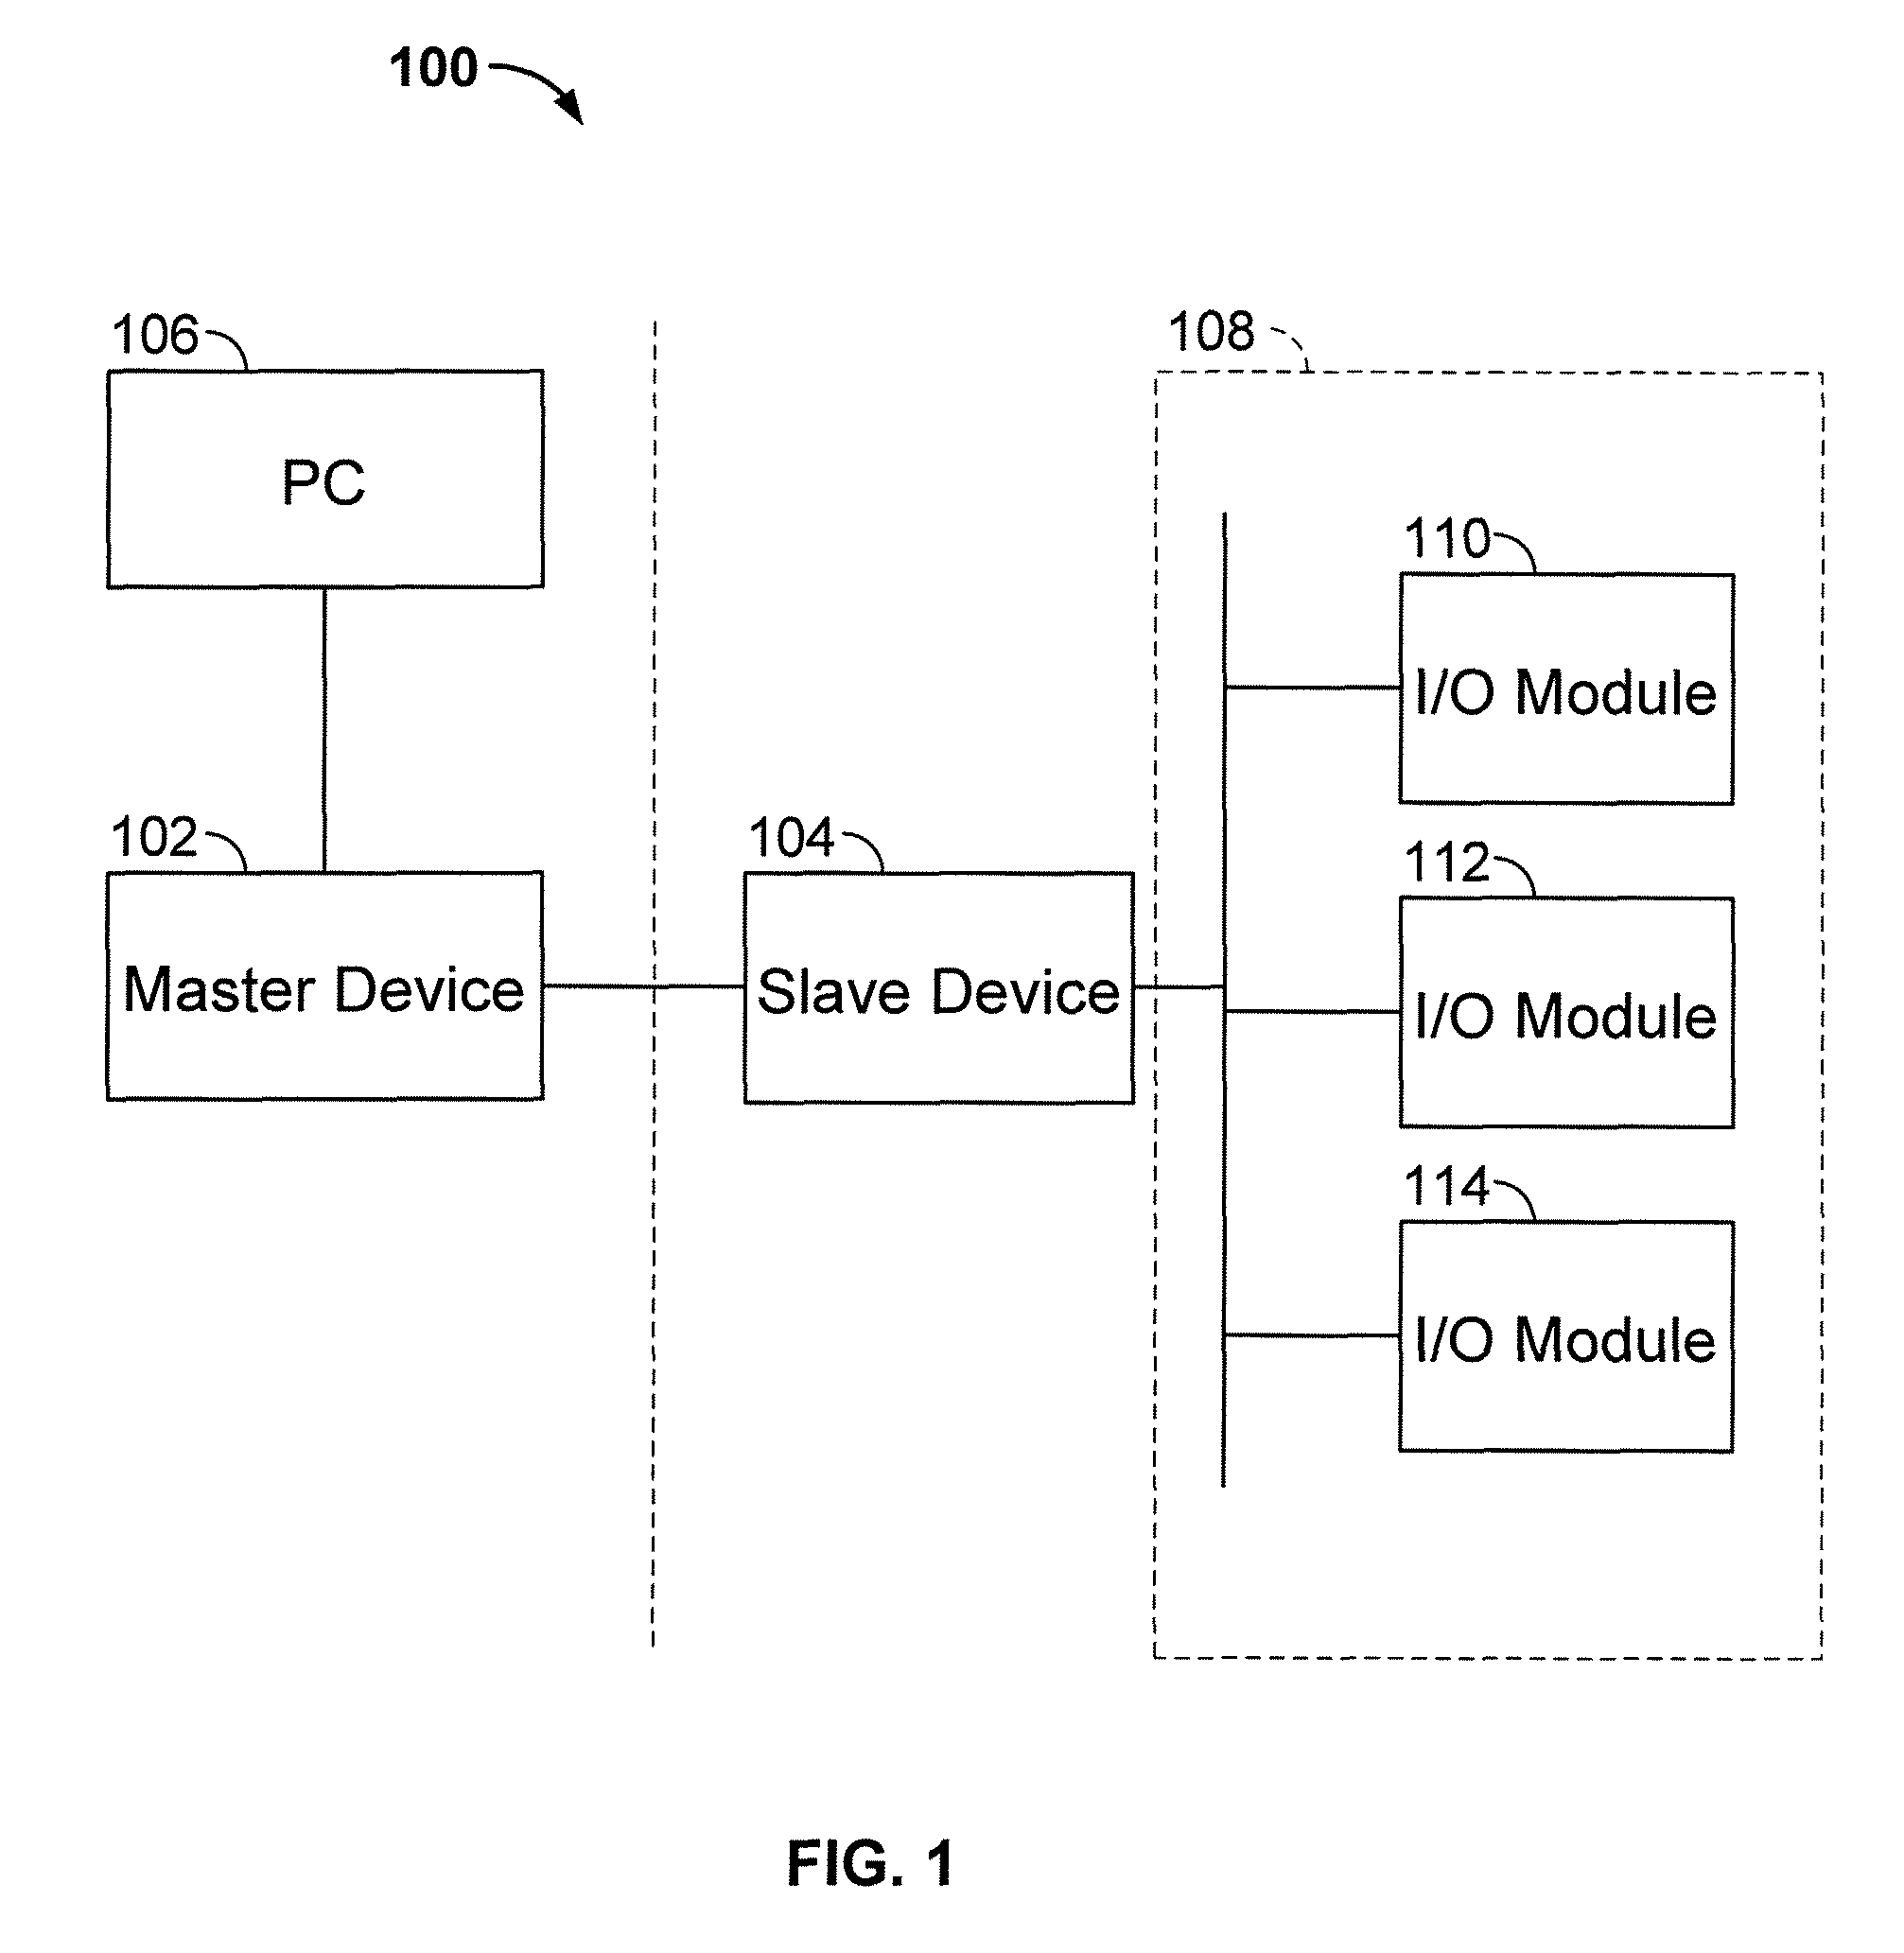 Method and apparatus for distributing configuration files in a distributed control system